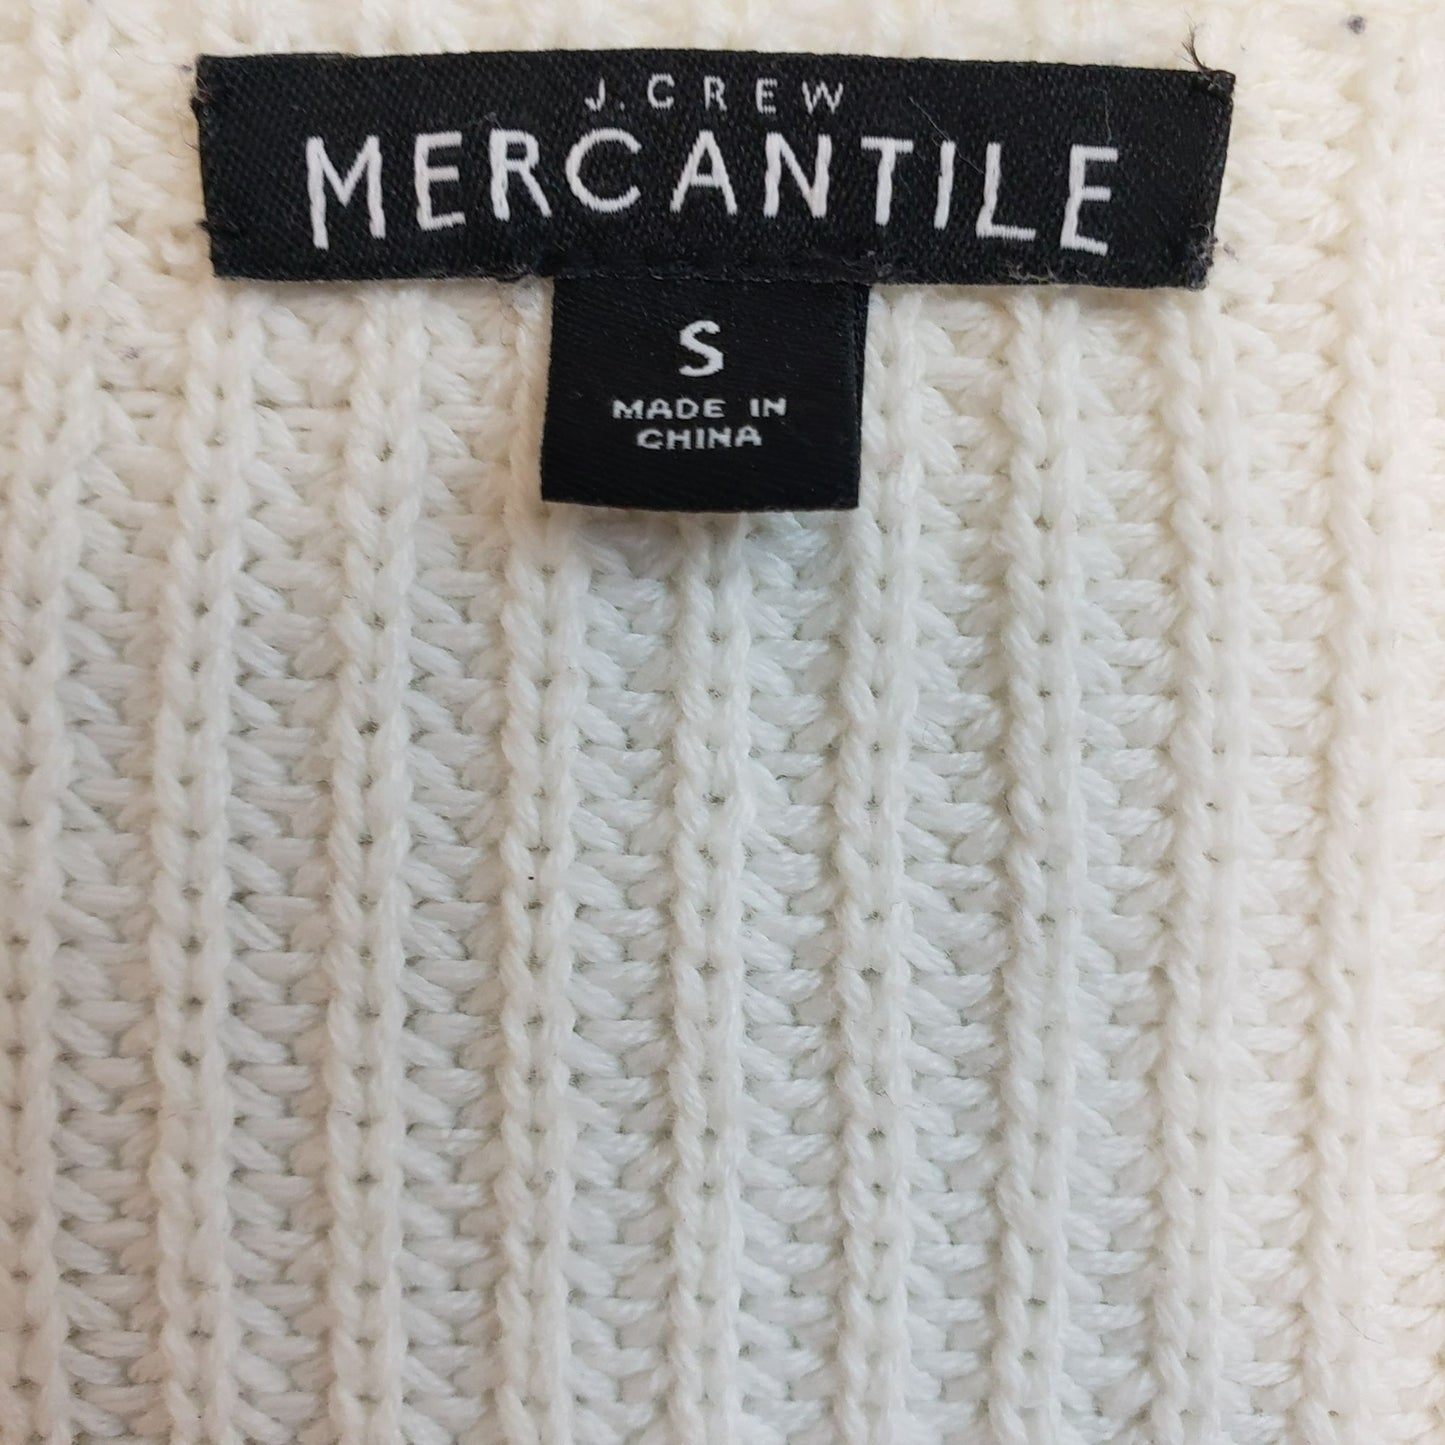 J. Crew Mercantile Cable Knit V-Neck Sweater Size S/M